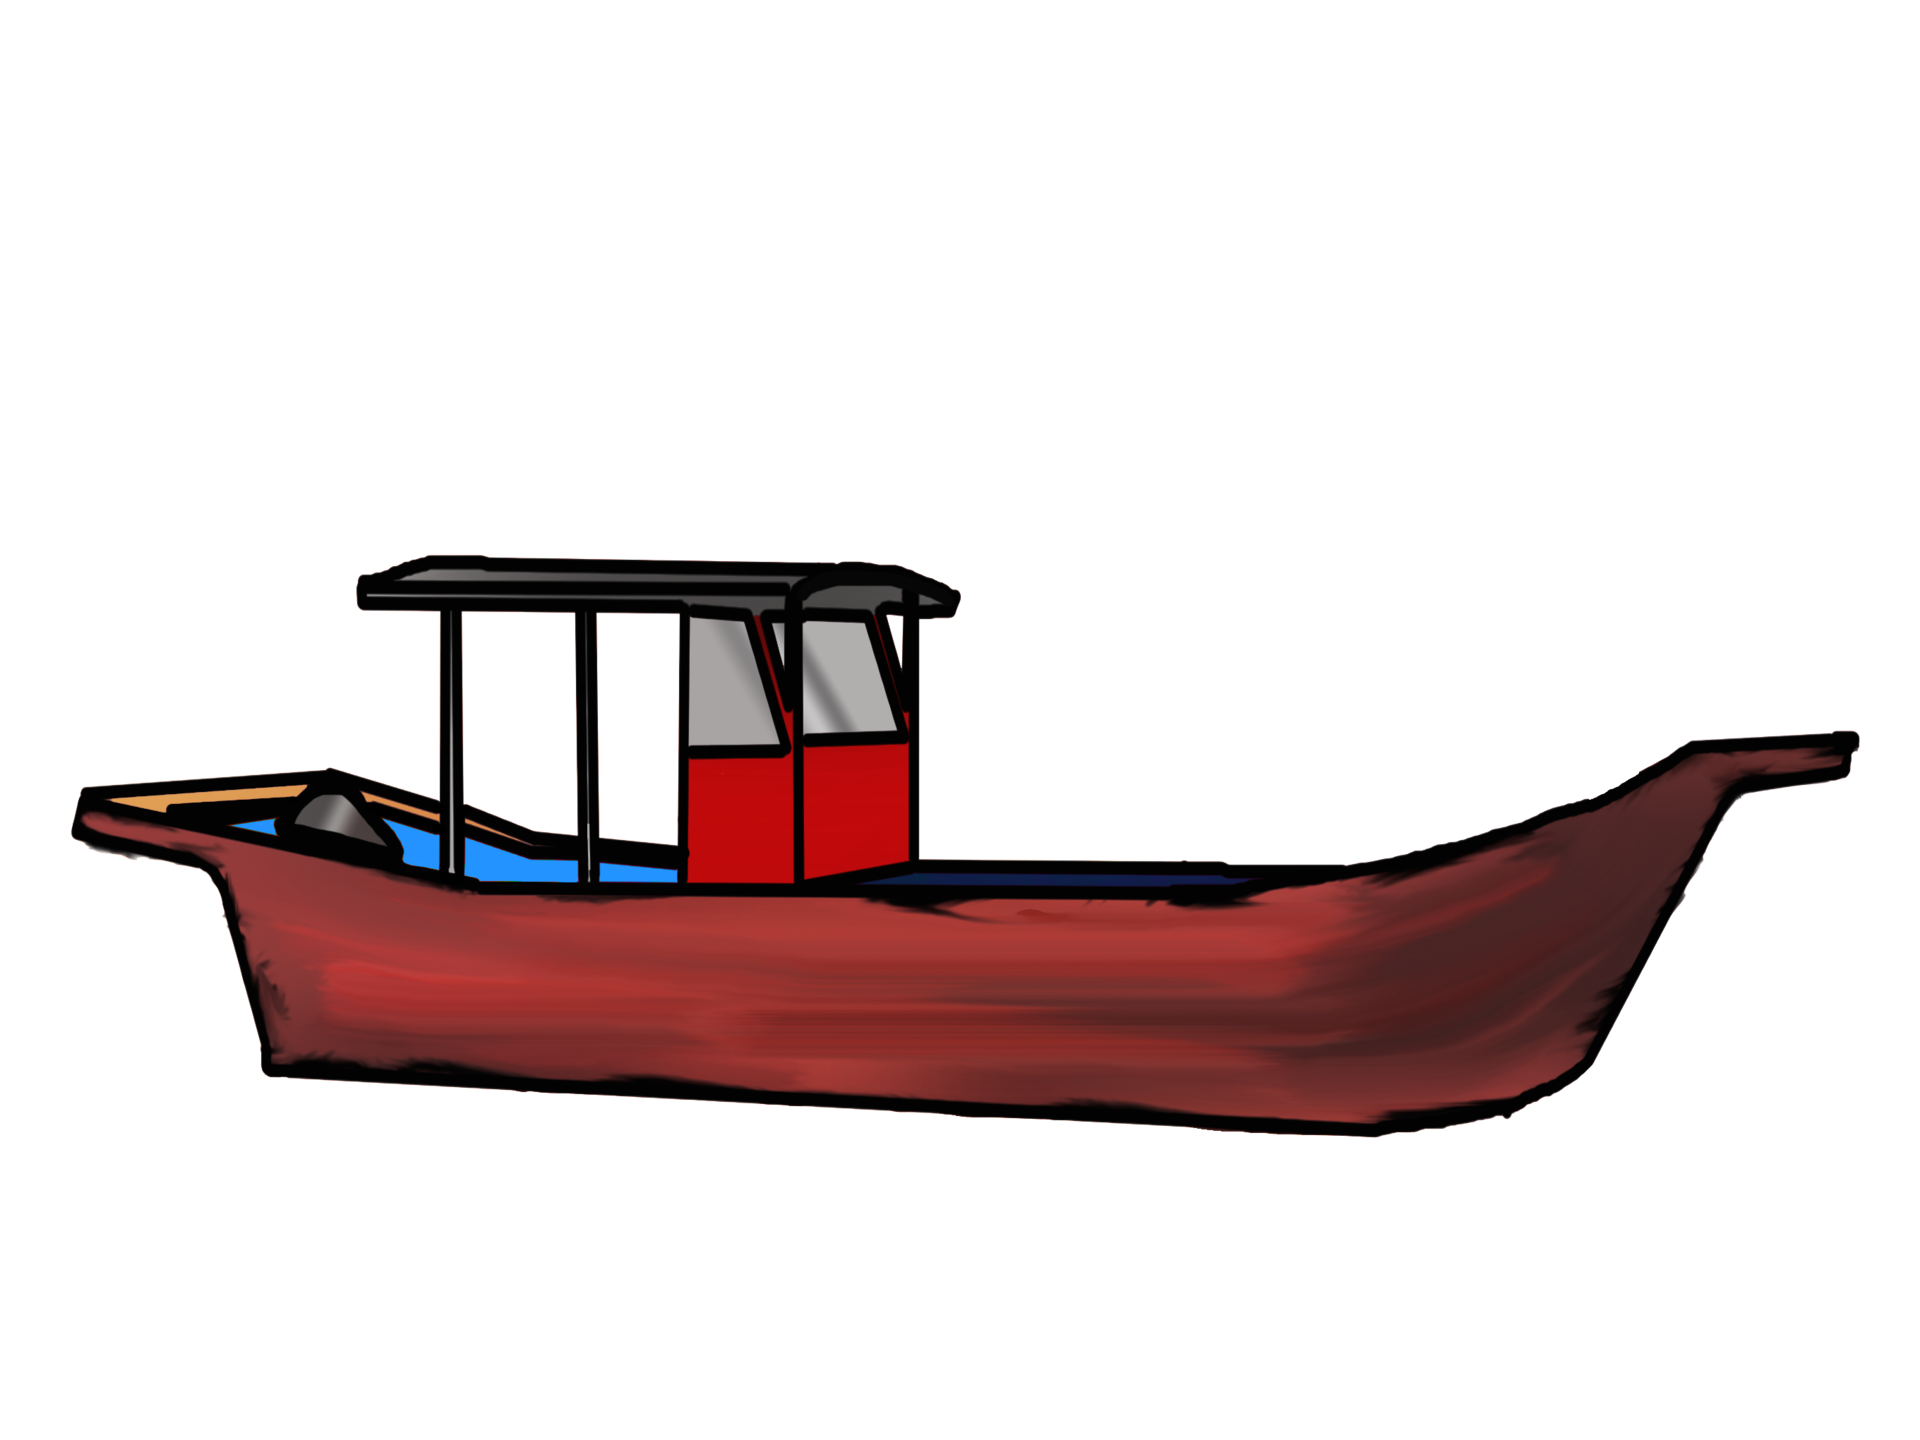 https://static.vecteezy.com/system/resources/previews/026/470/429/original/icon-logo-sticker-fishing-boat-free-png.png